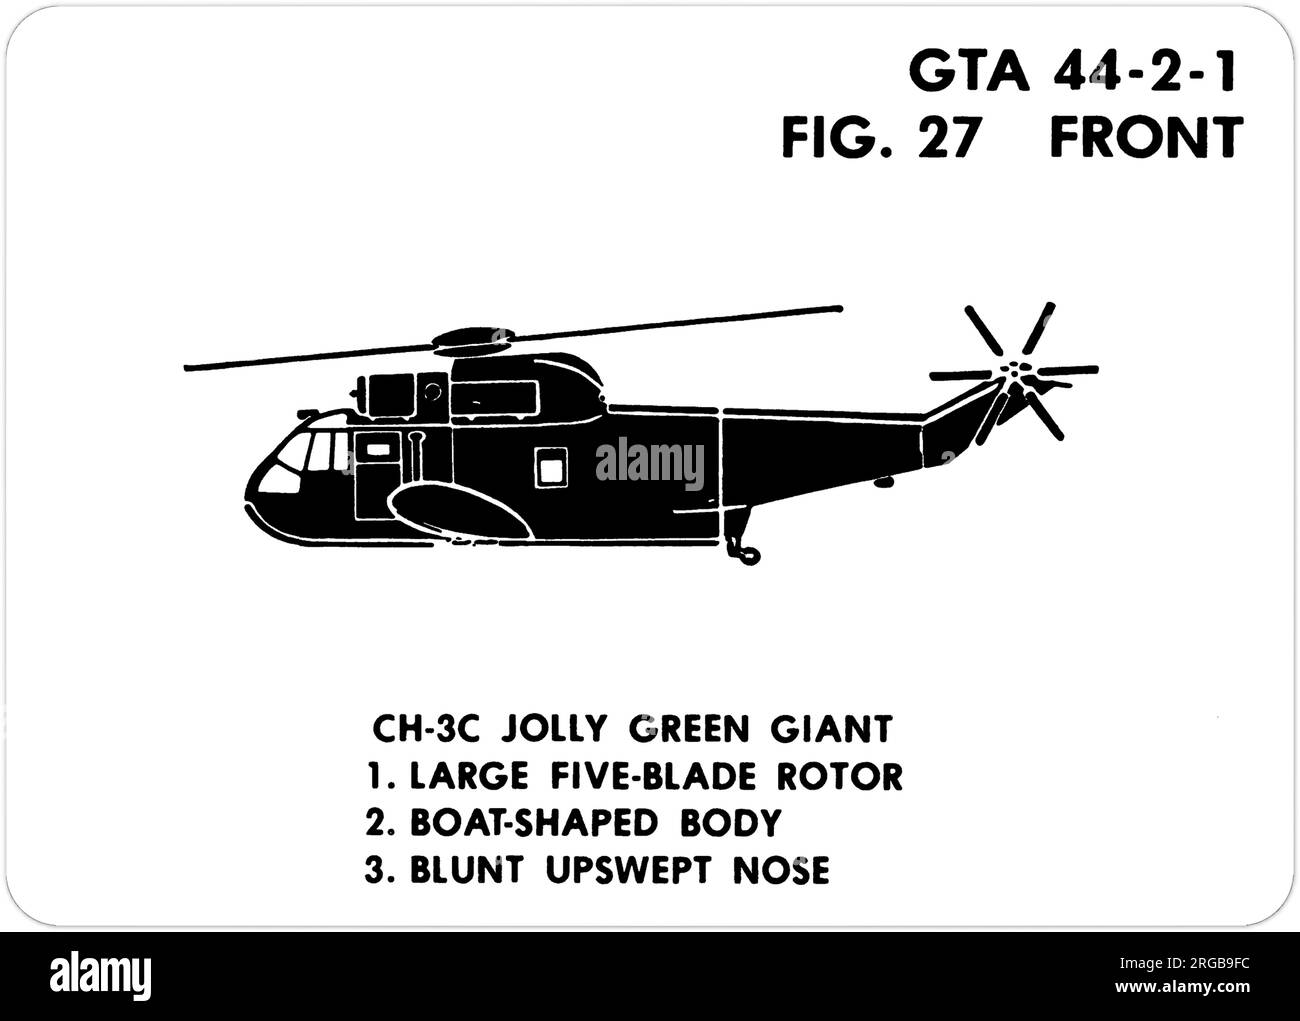 Sikorsky SH-3A Sea King. This is one of the series of Graphics Training Aids (GTA) used by the United States Army to train their personnel to recognize friendly and hostile aircraft. This particular set, GTA 44-2-1, was issued in July1977. The set features aircraft from: Canada, Italy, United Kingdom, United States, and the USSR. Stock Photo